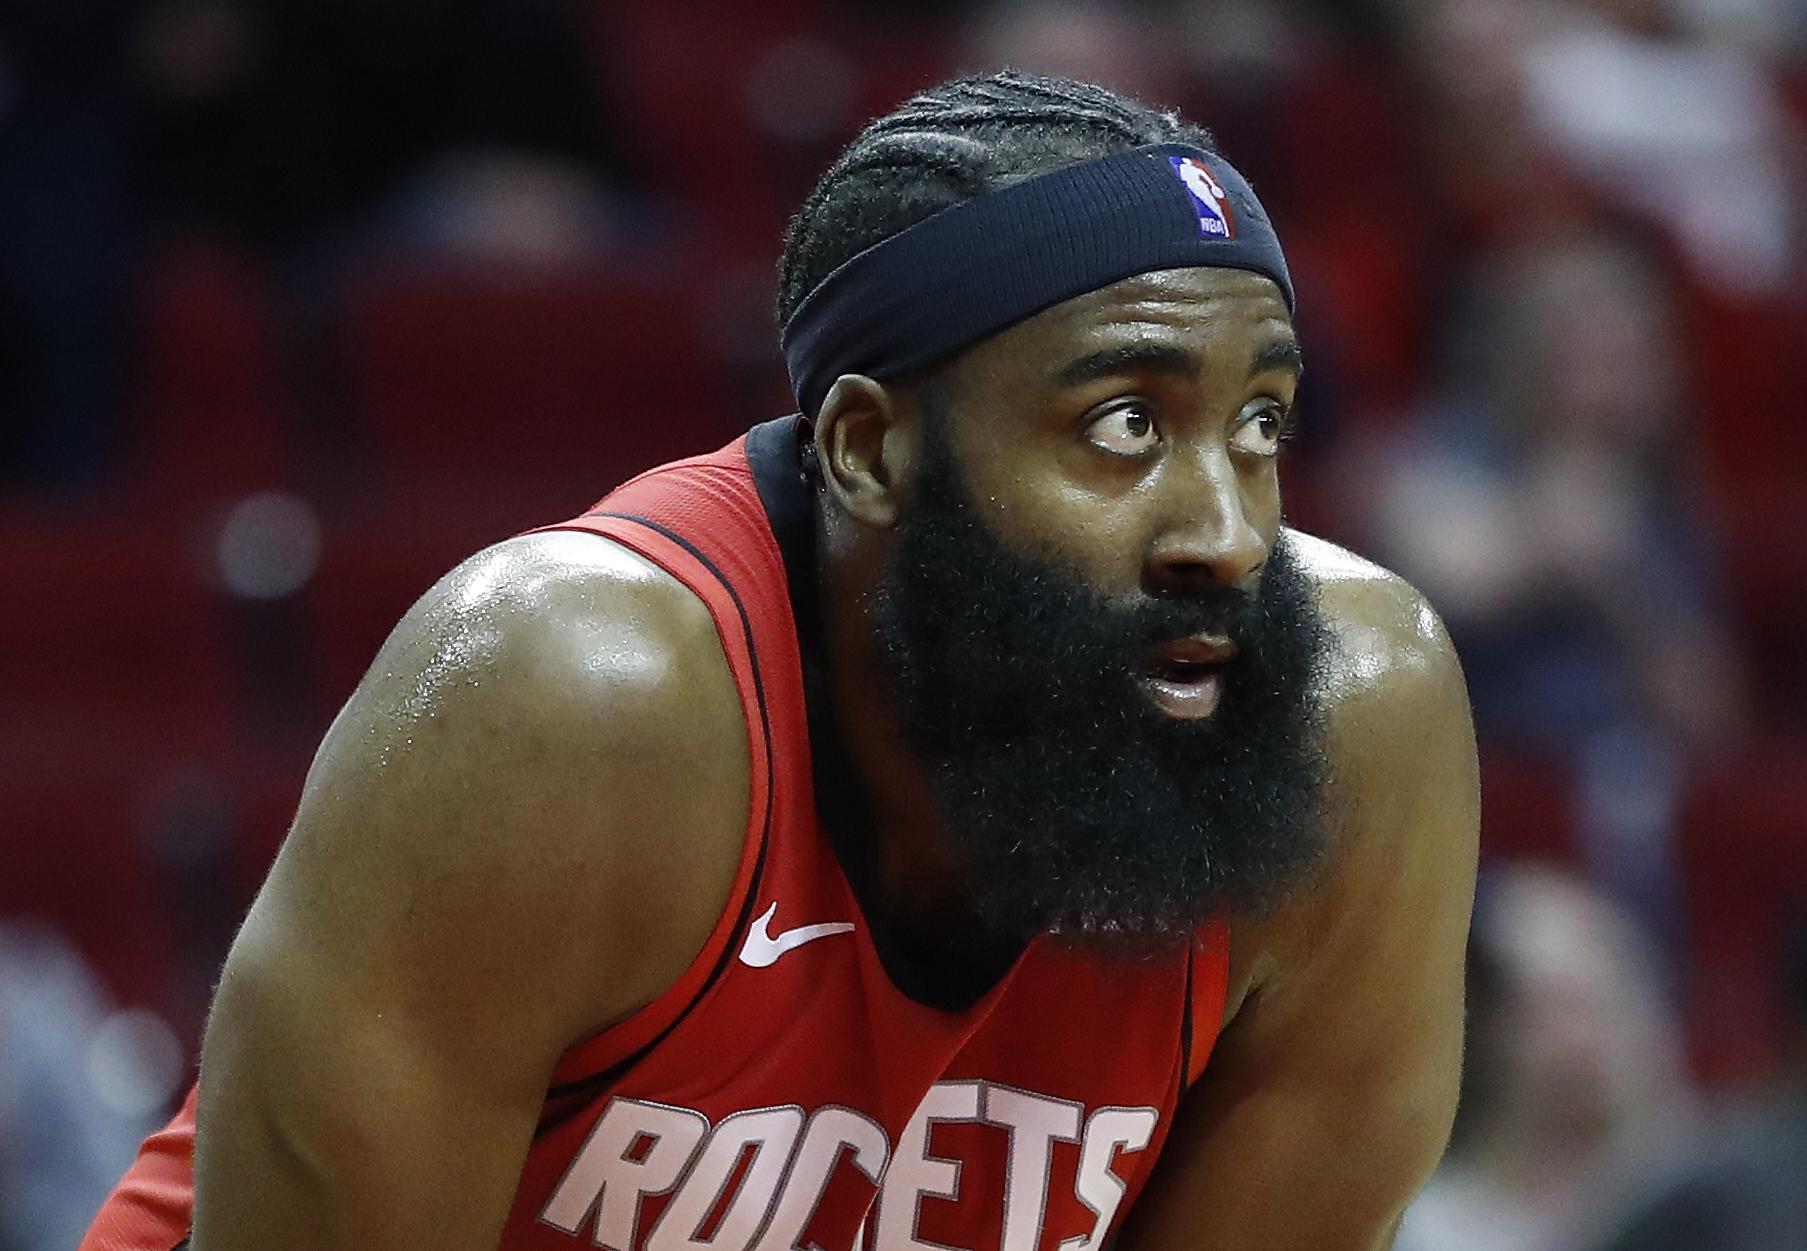 James Harden says his beard protected him from the ball that hit his face